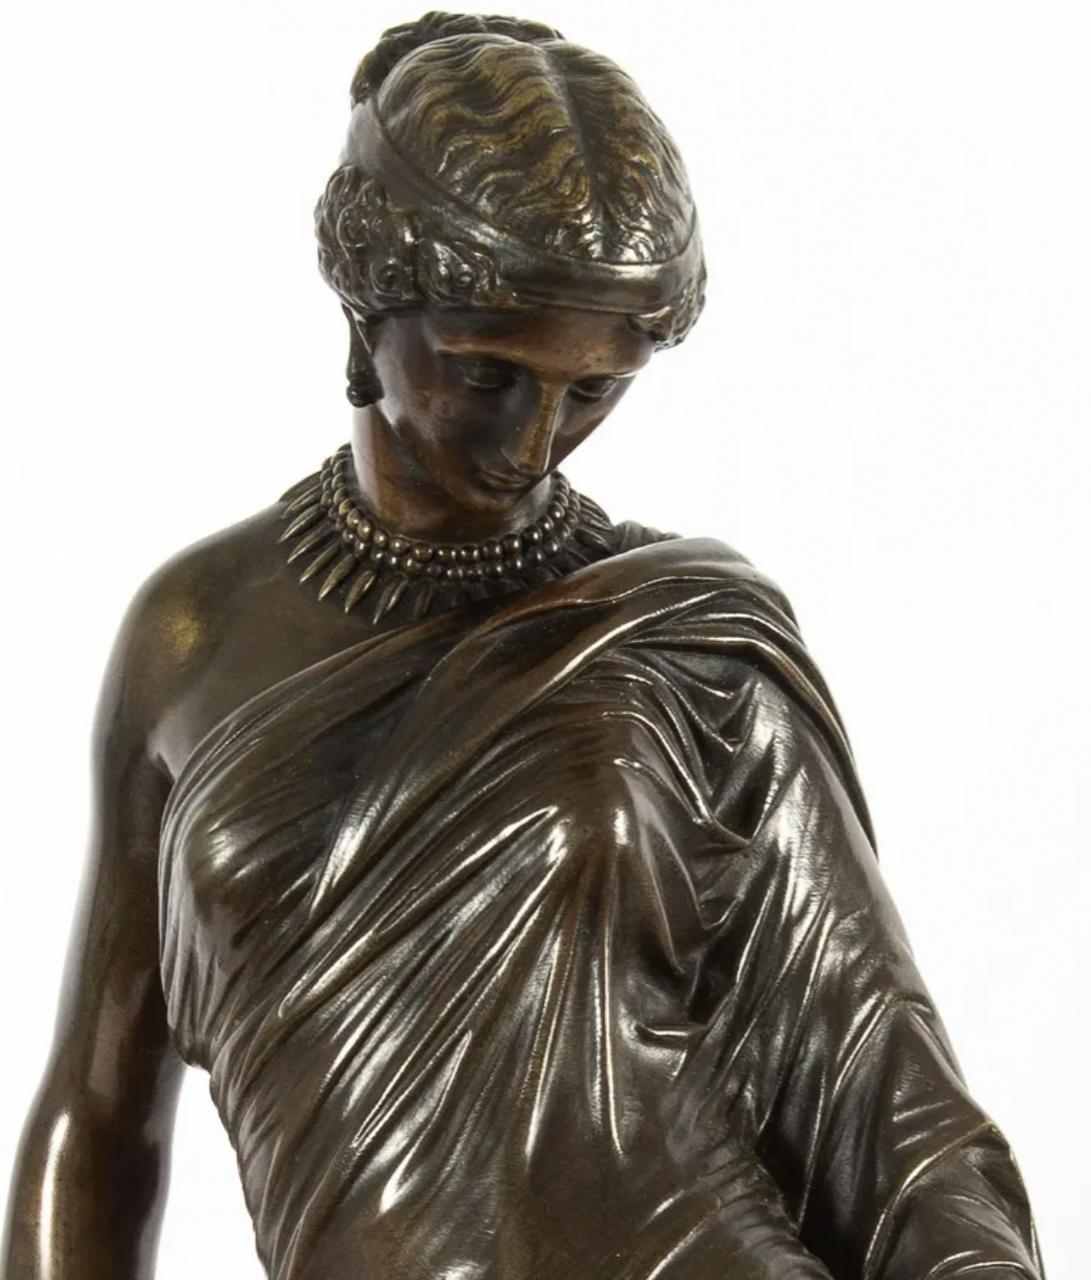 Sappho Leaning Against a Column Holding Her Lyre by Pradier in French Bronze - Sculpture by James Pradier 